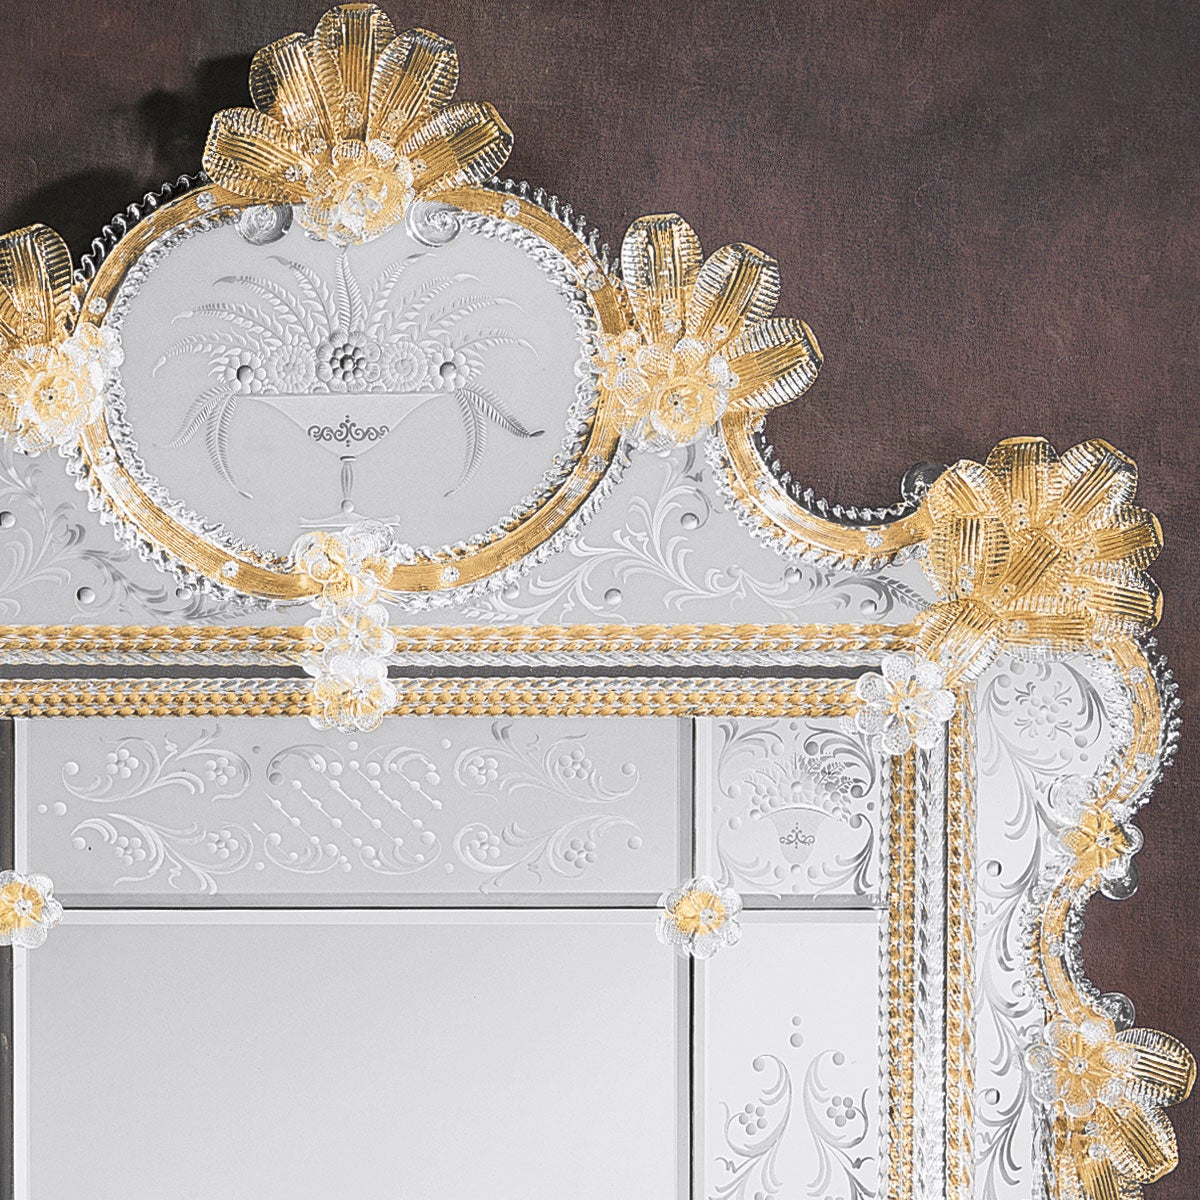 A luxurious Venetian-style mirror made of Murano glass.
Made by the expert hands of Murano glass masters, with a frame formed by crystal rods and curls on a gold background with trimmings of leaves, roses and crystal flowers, the engravings that